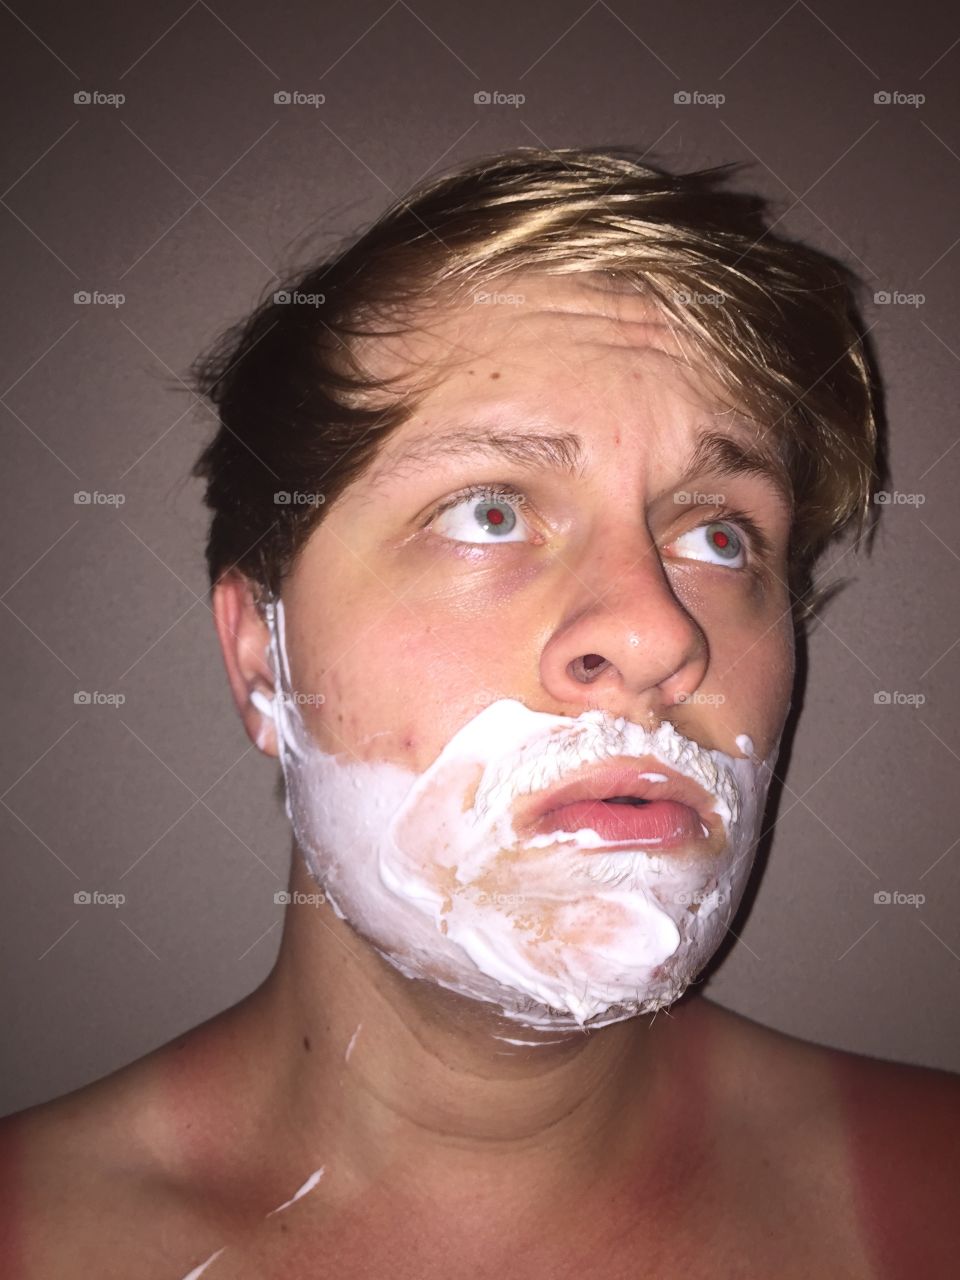 I’m taking a selfie with shaving cream on my face.